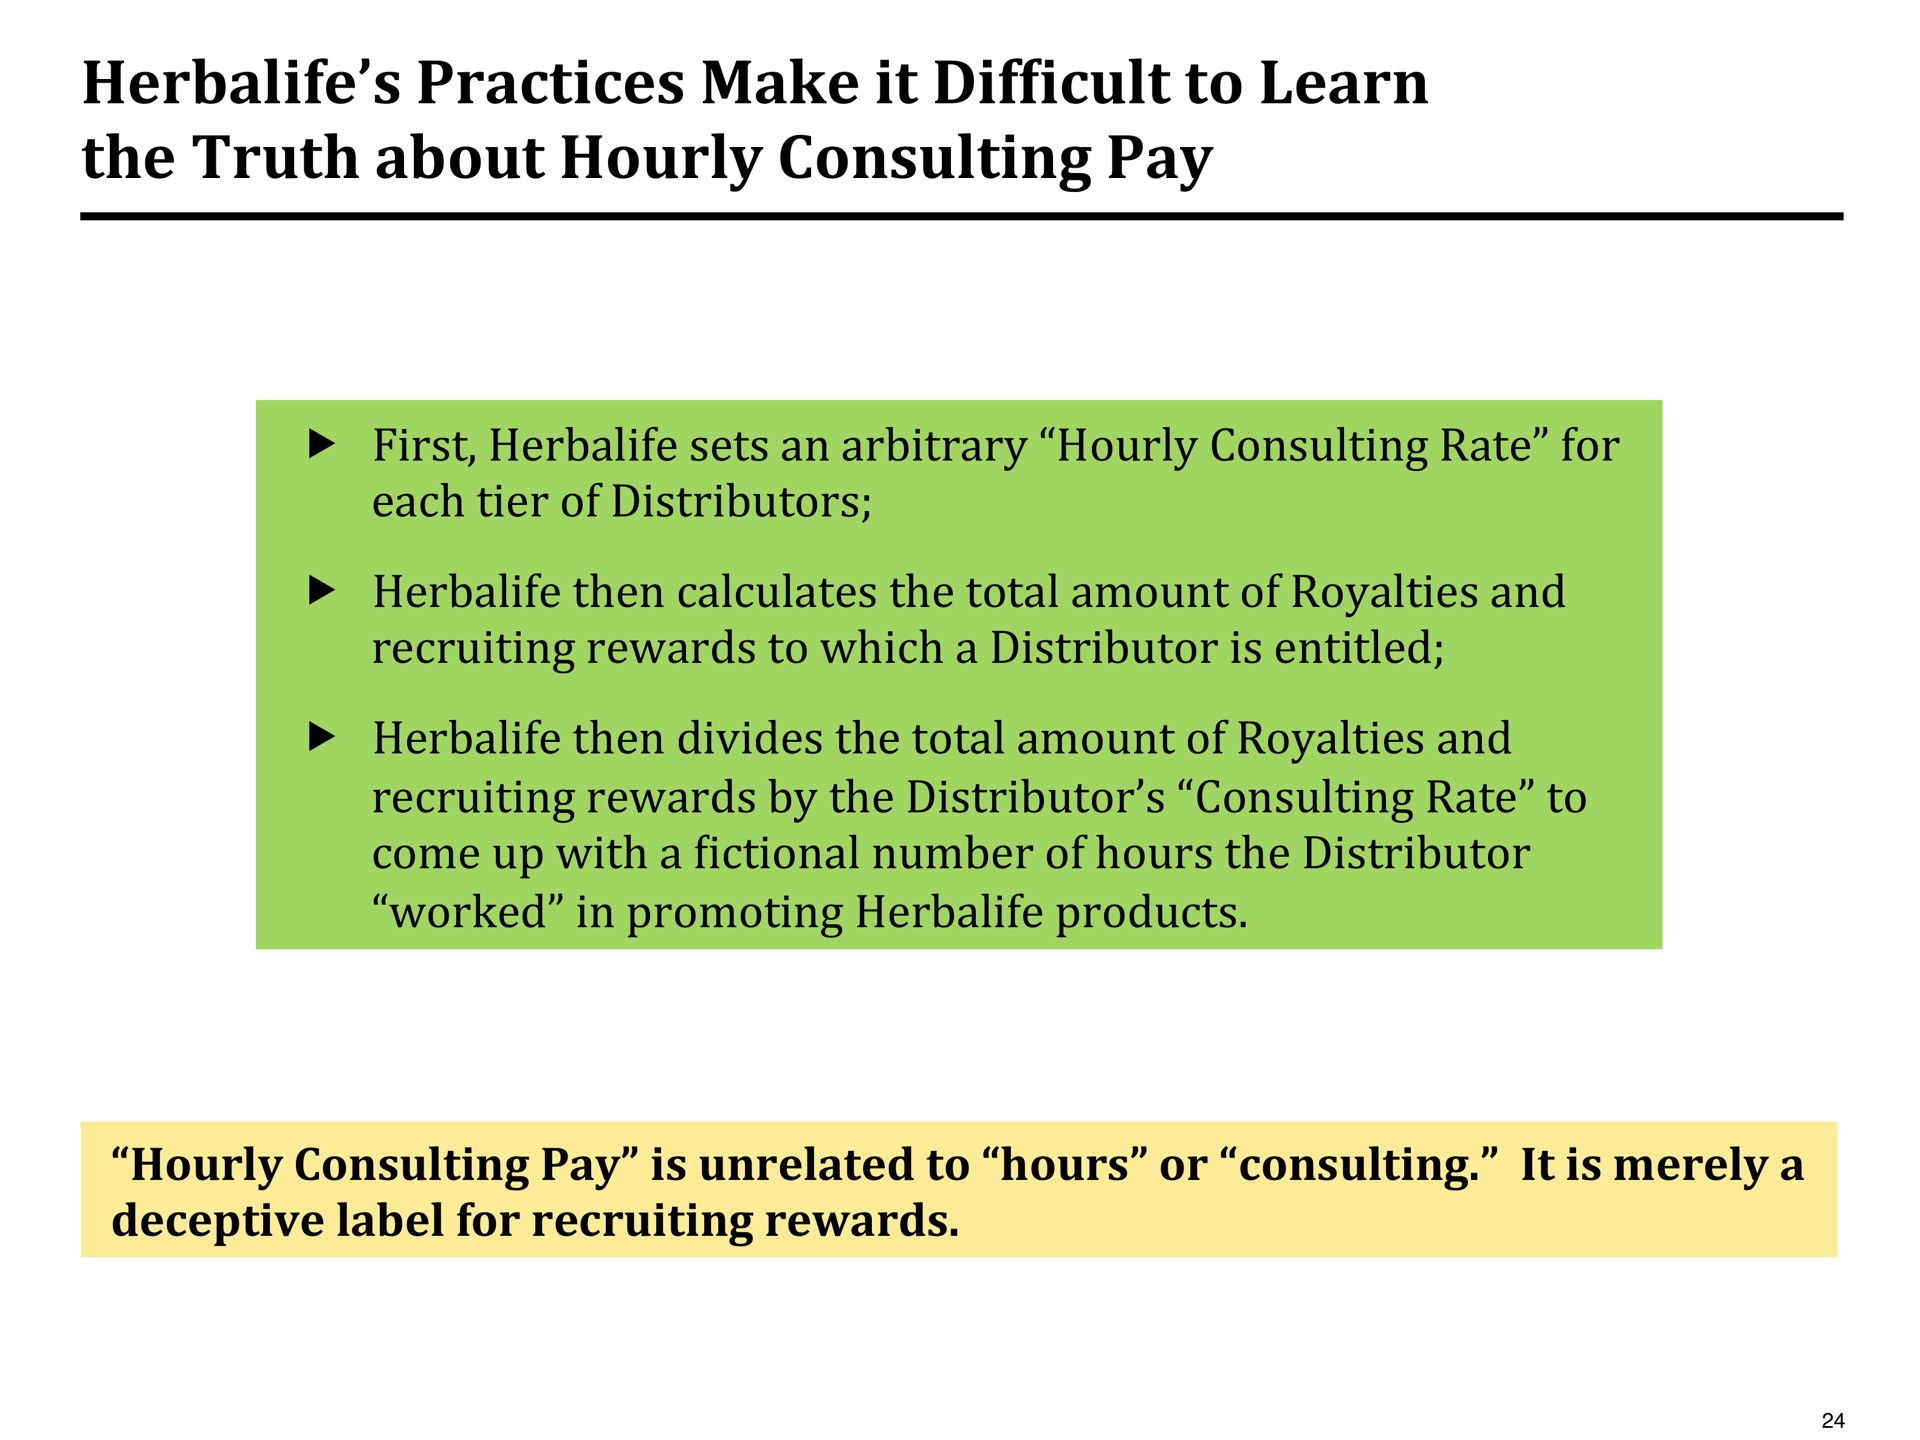 practices make it difficult to learn the truth about hourly consulting pay | Pershing Square